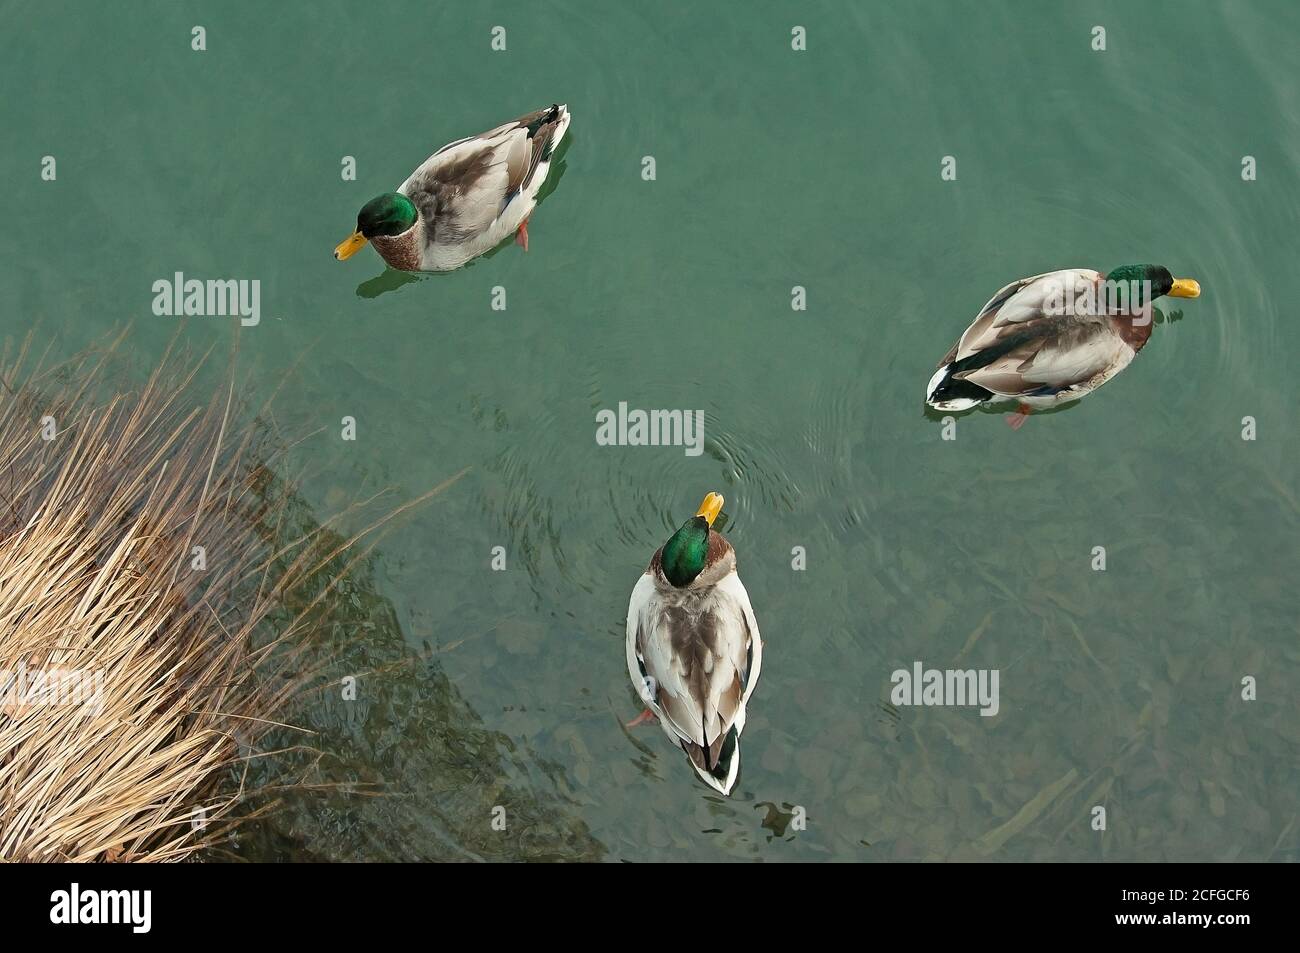 3 ducks swimming together on the green water lake in different diretions Stock Photo